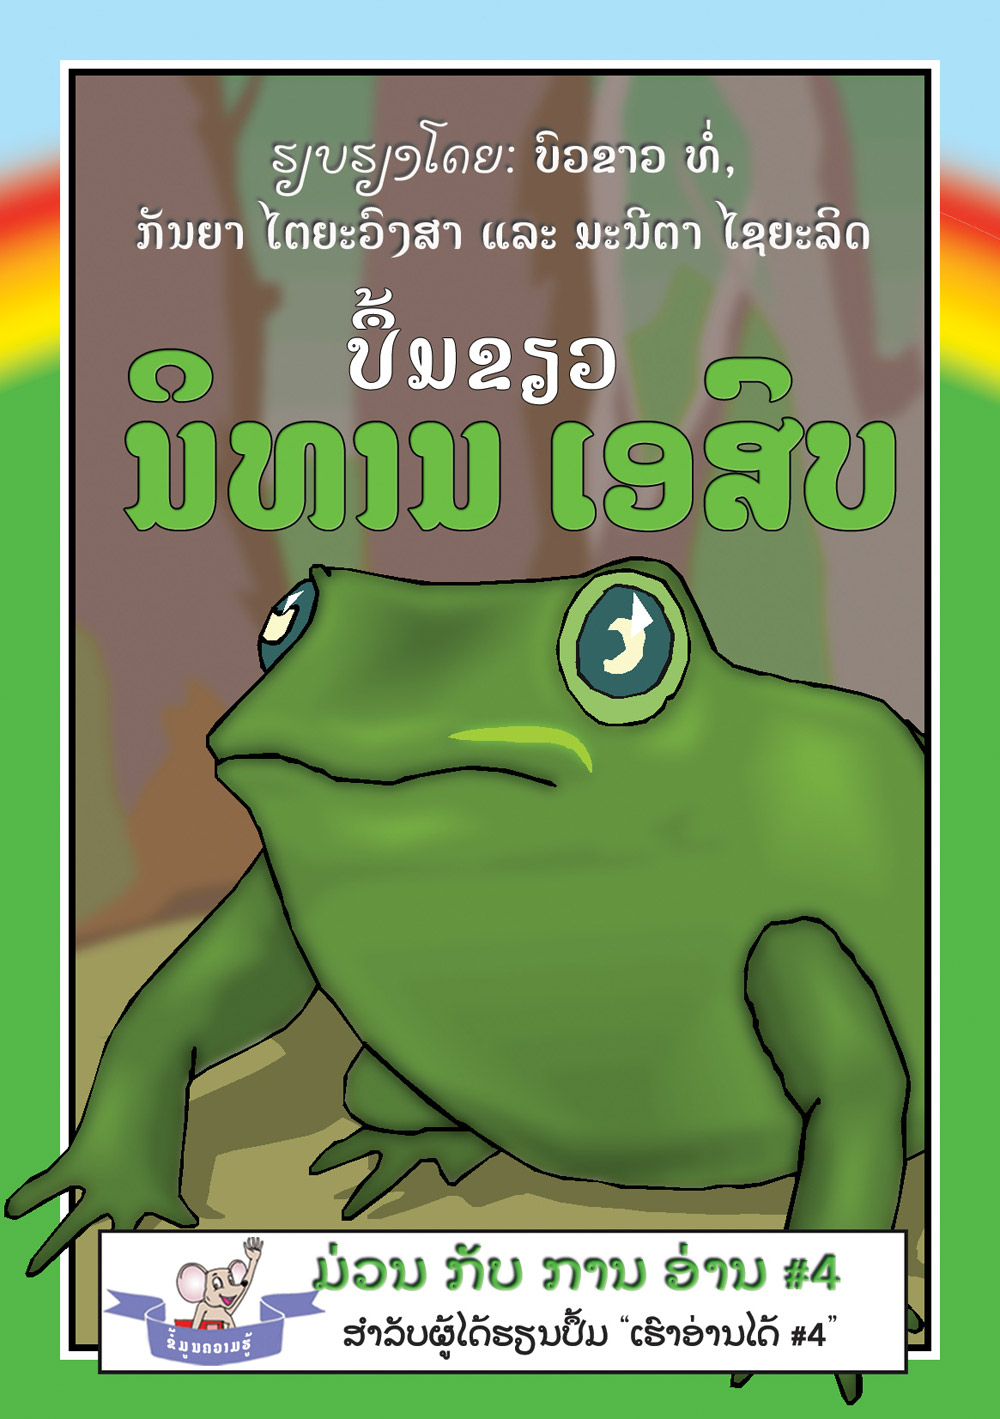 The Green Book of Aesops Fables large book cover, published in Lao language